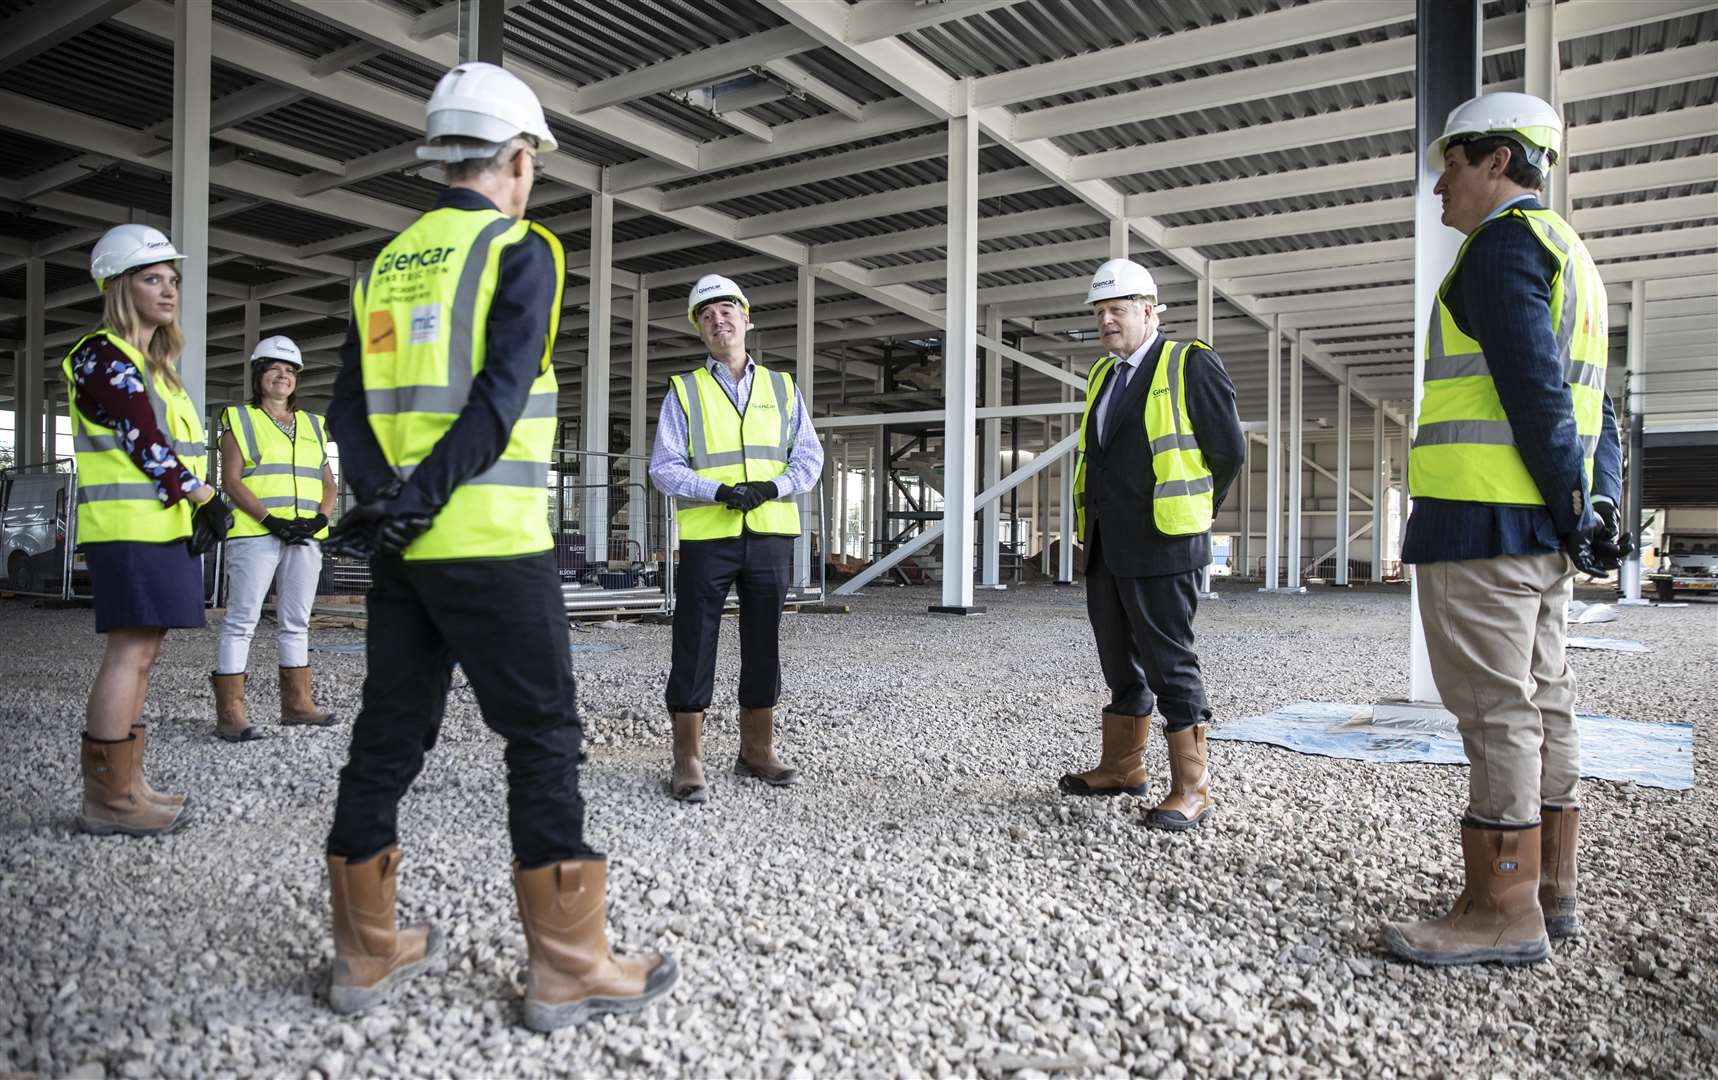 Prime Minister Boris Johnson talks with scientists as he visits the construction site (Richard Pohle/The Times)